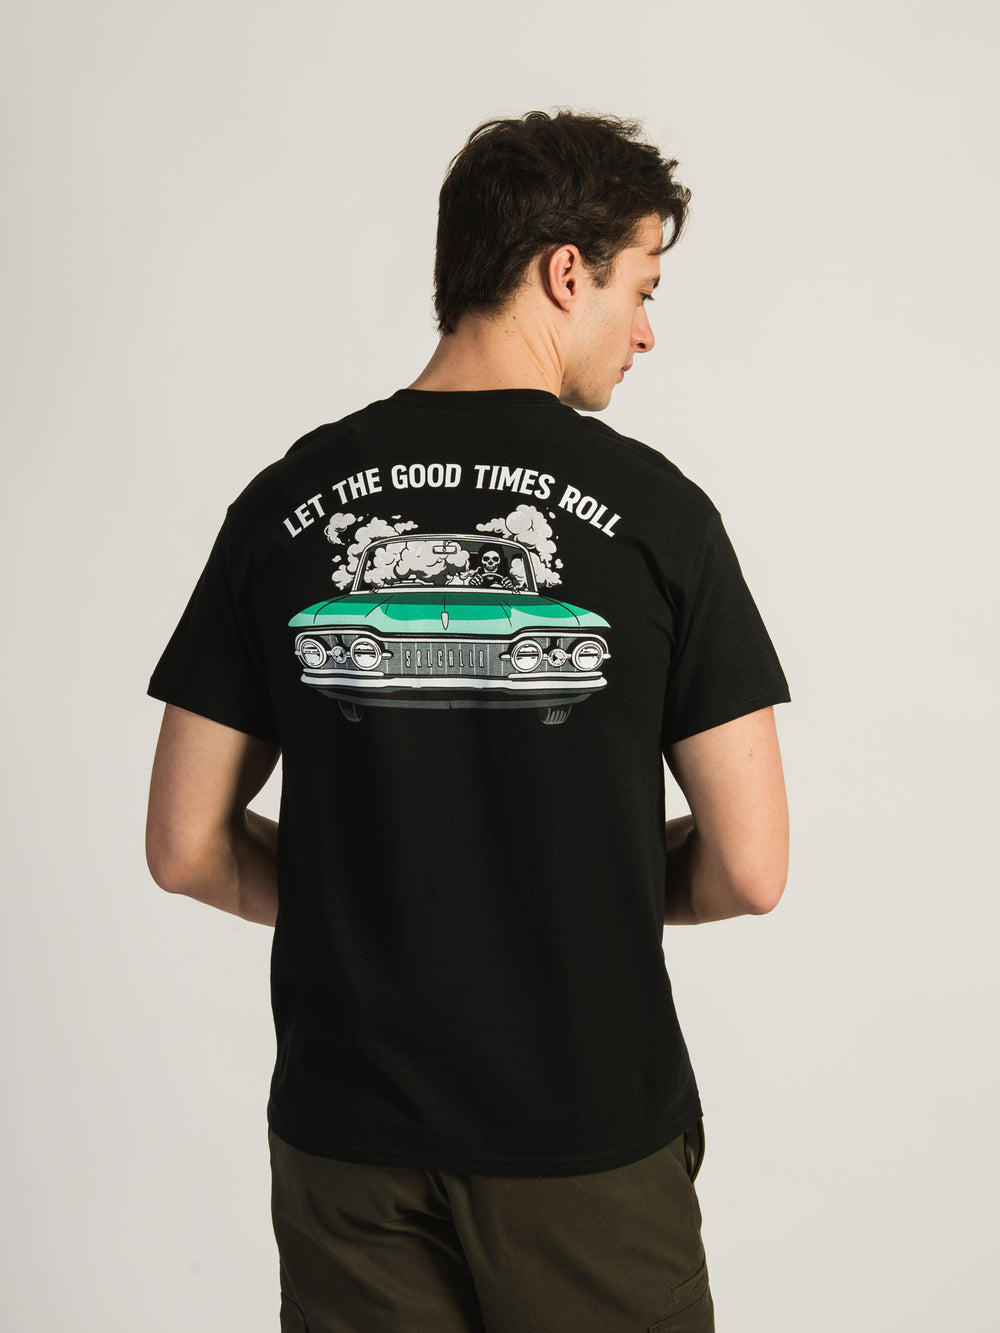 LAST CALL LET THE GOOD TIMES ROLL T-SHIRT